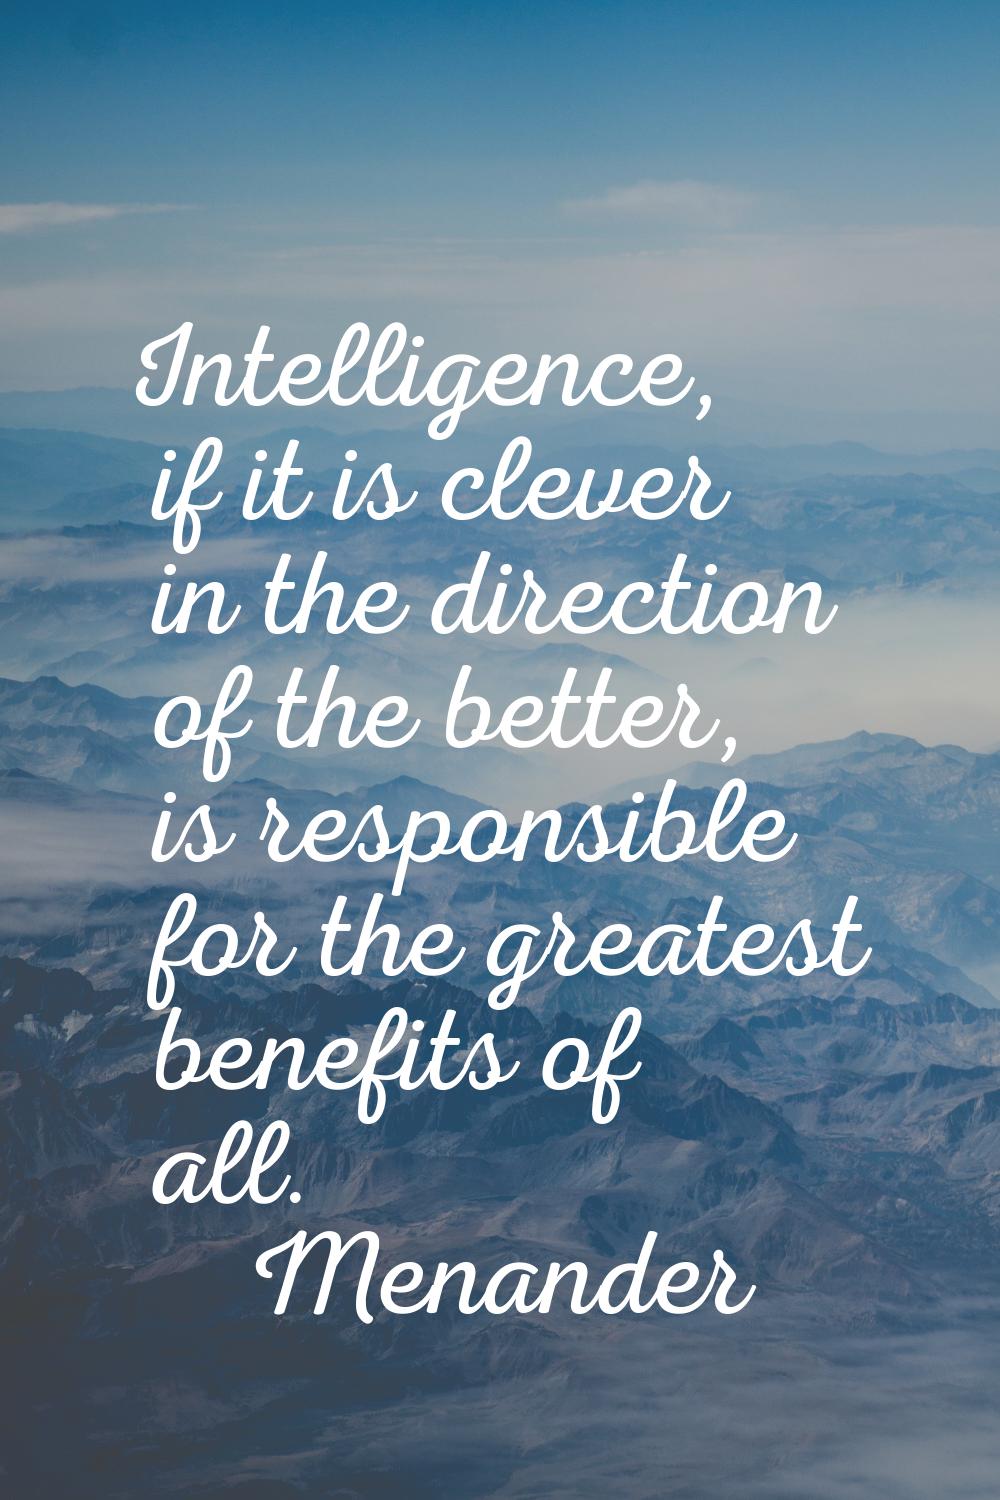 Intelligence, if it is clever in the direction of the better, is responsible for the greatest benef